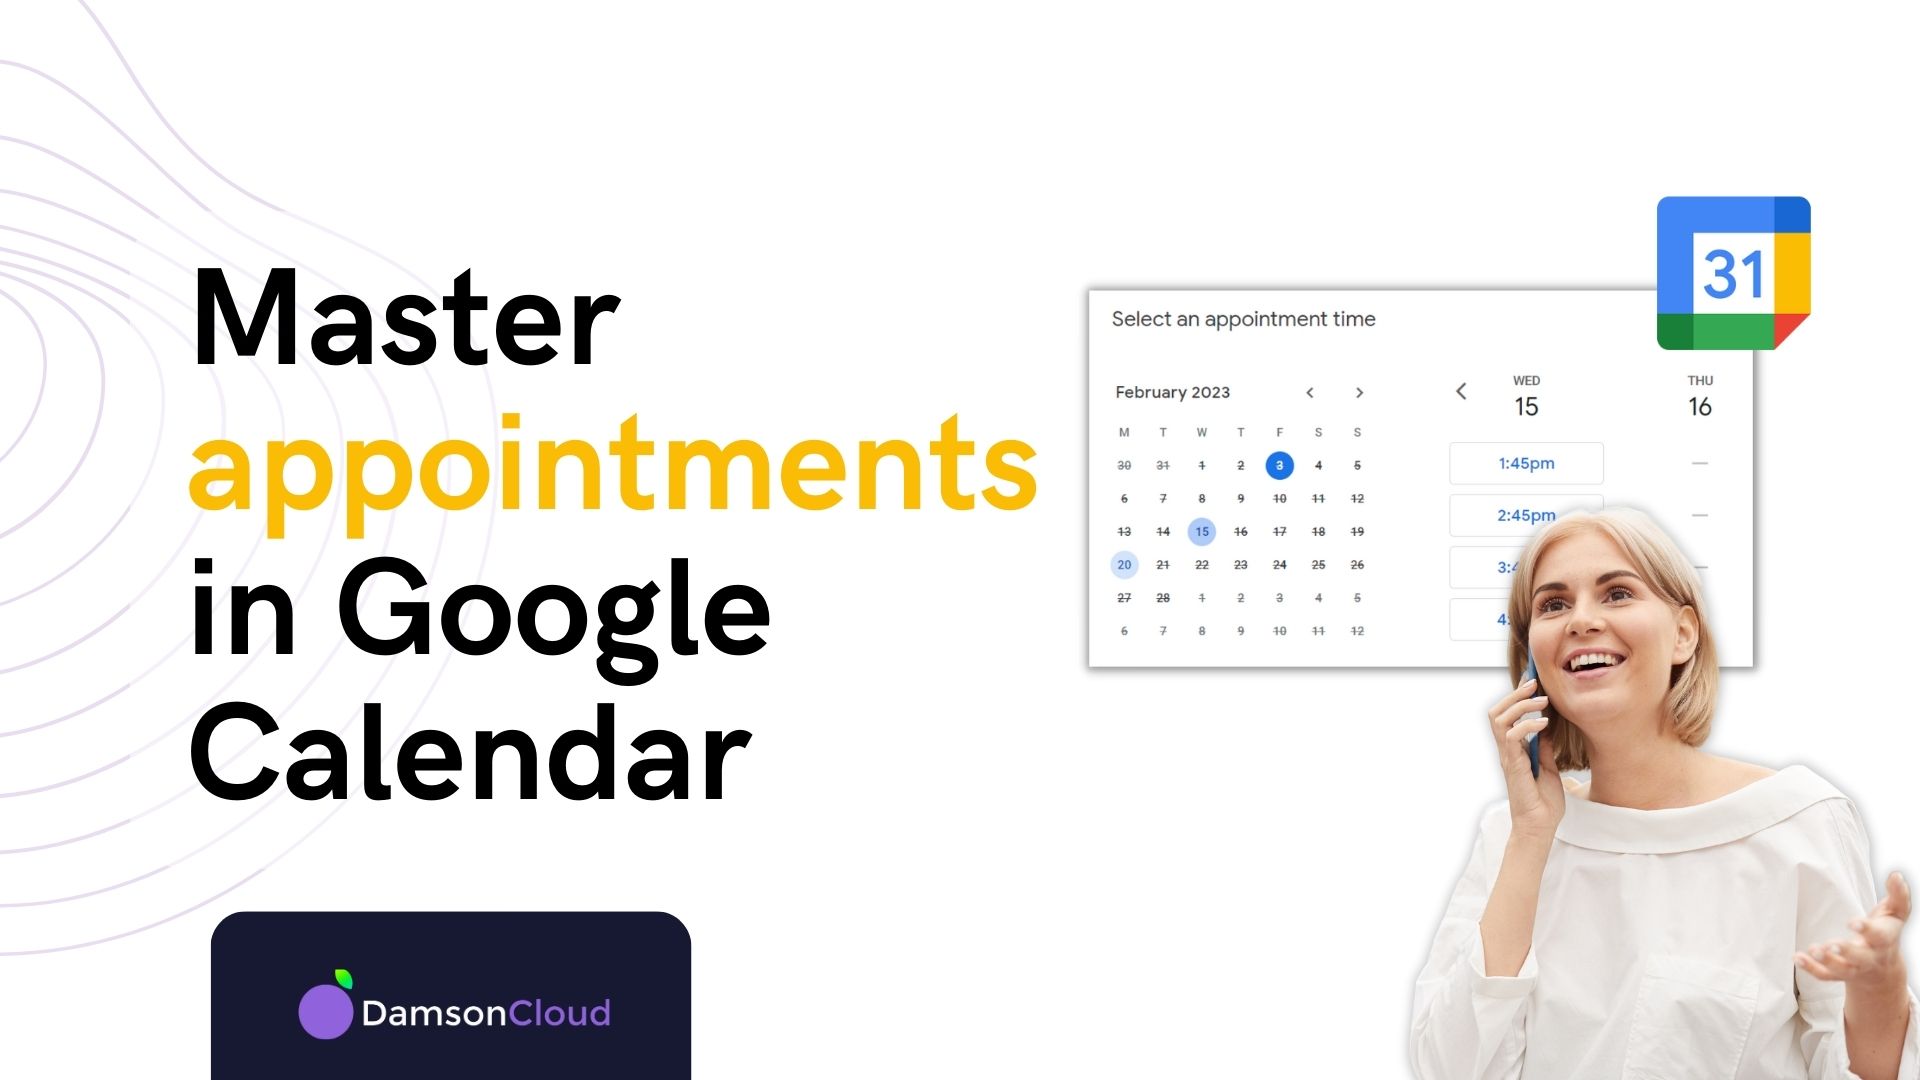 <strong>Master appointments in Google Calendar</strong>